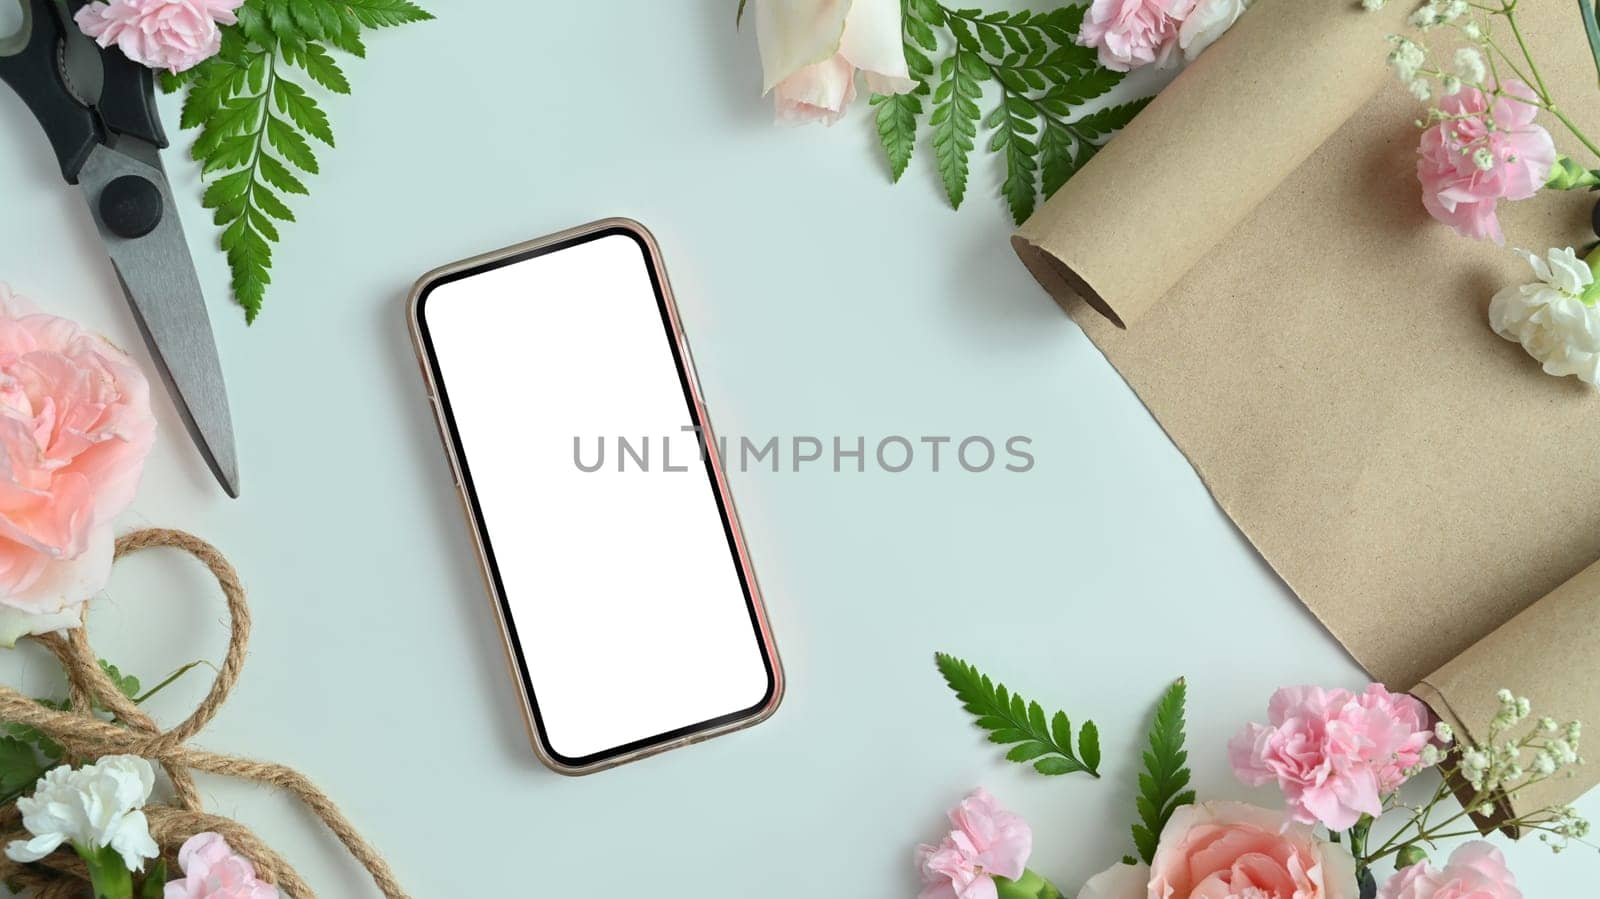 Smartphone with blank screen, pink flowers, shears, wrapping paper and leaves arrangement on white background by prathanchorruangsak